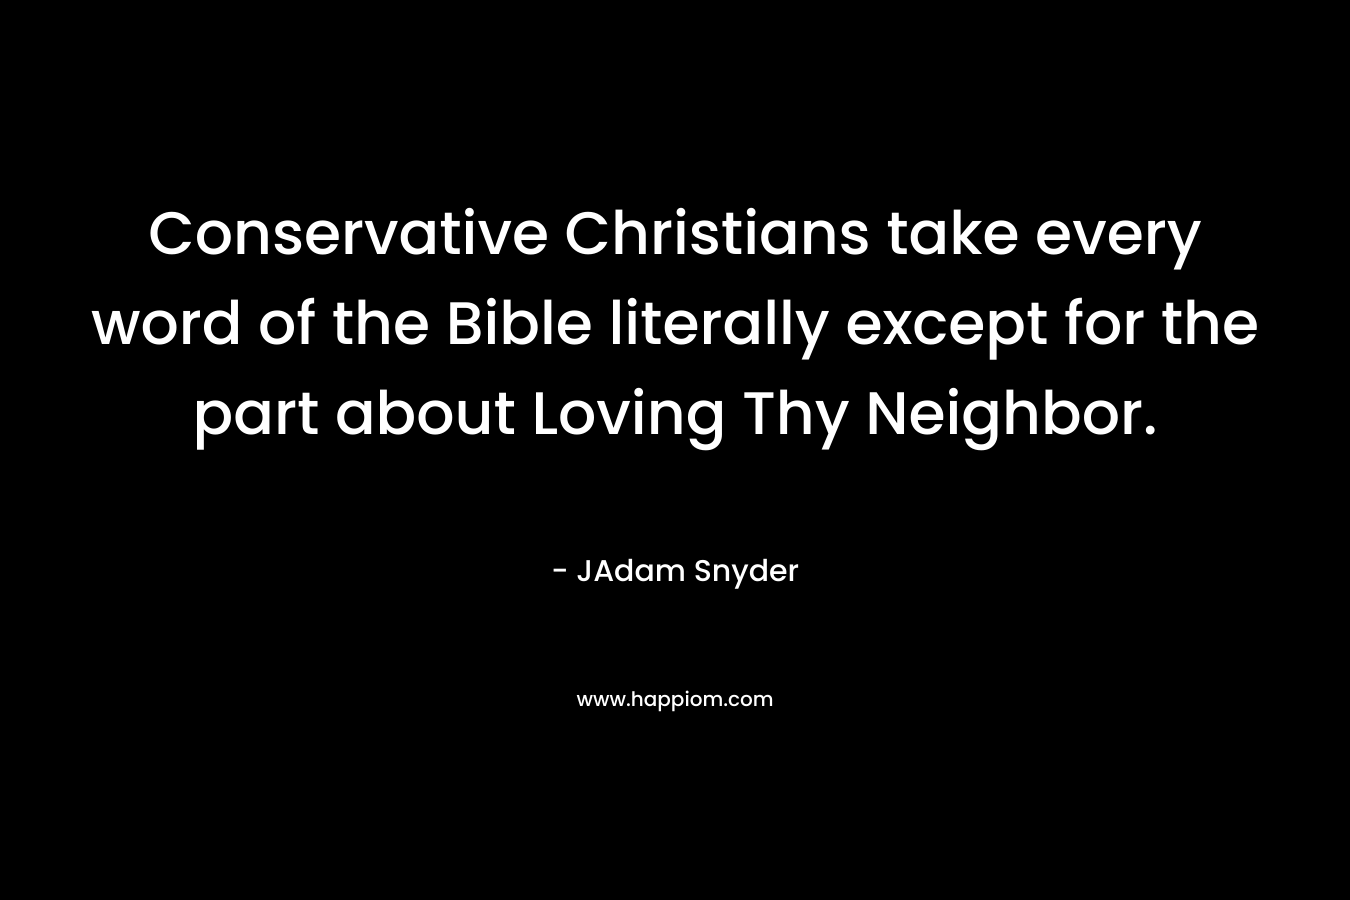 Conservative Christians take every word of the Bible literally except for the part about Loving Thy Neighbor.